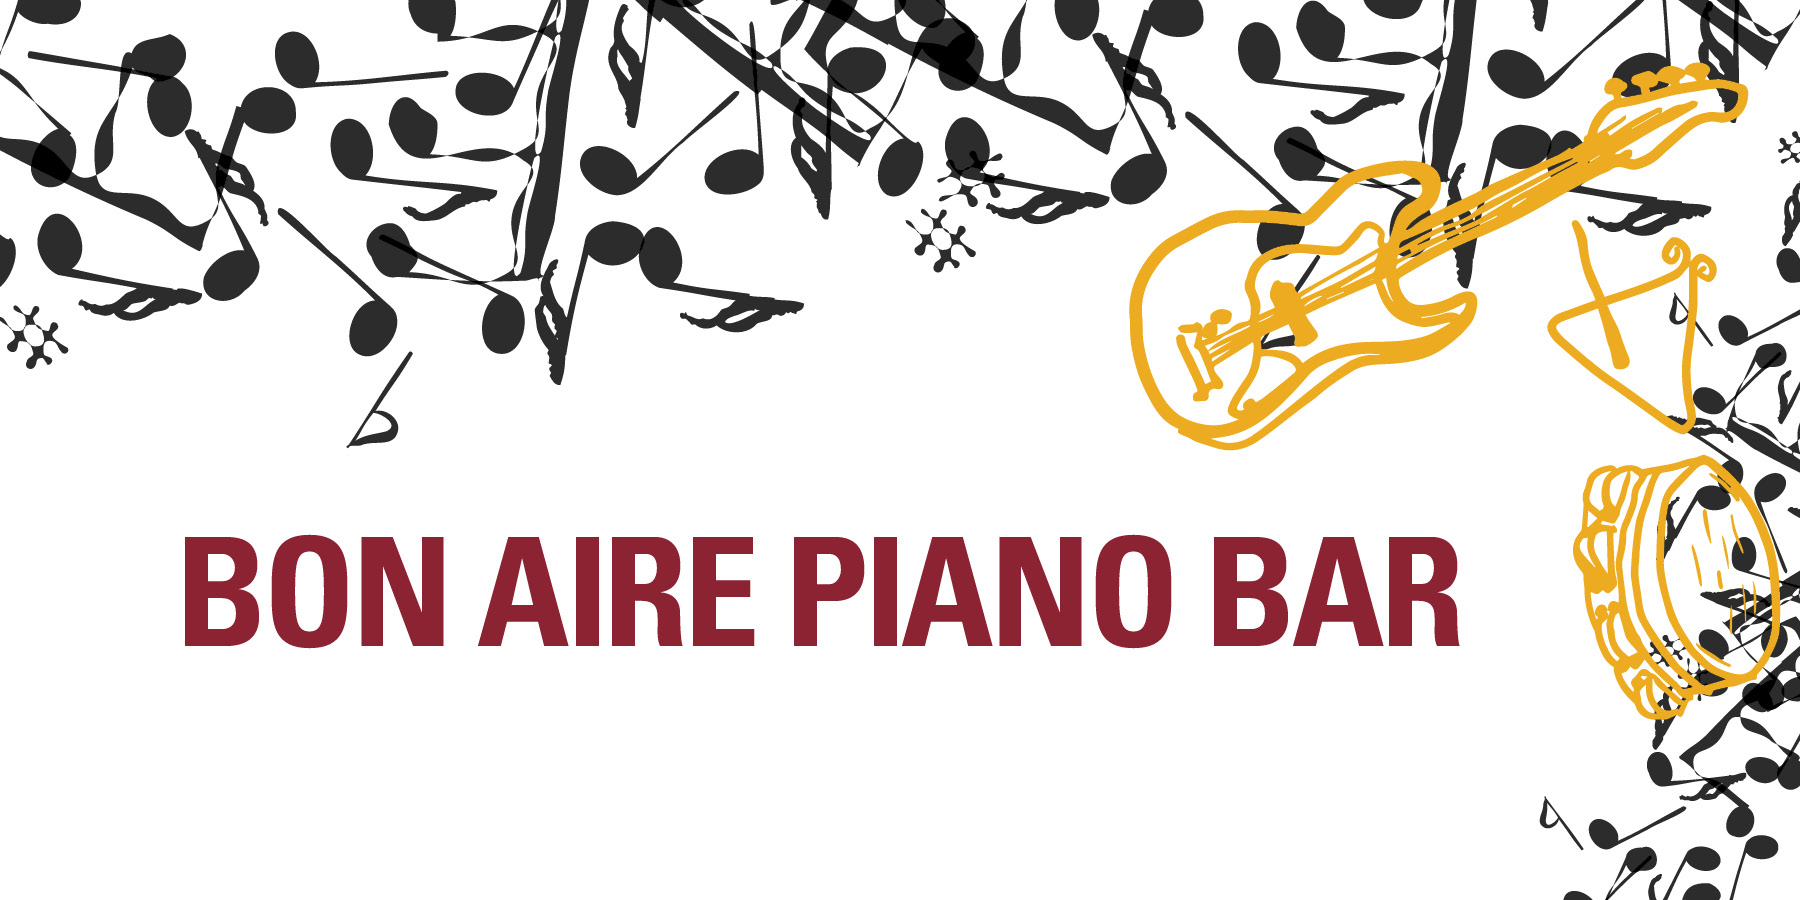 Black and gold music notes and instrument icons surround the words, "Bon Aire Piano Bar".